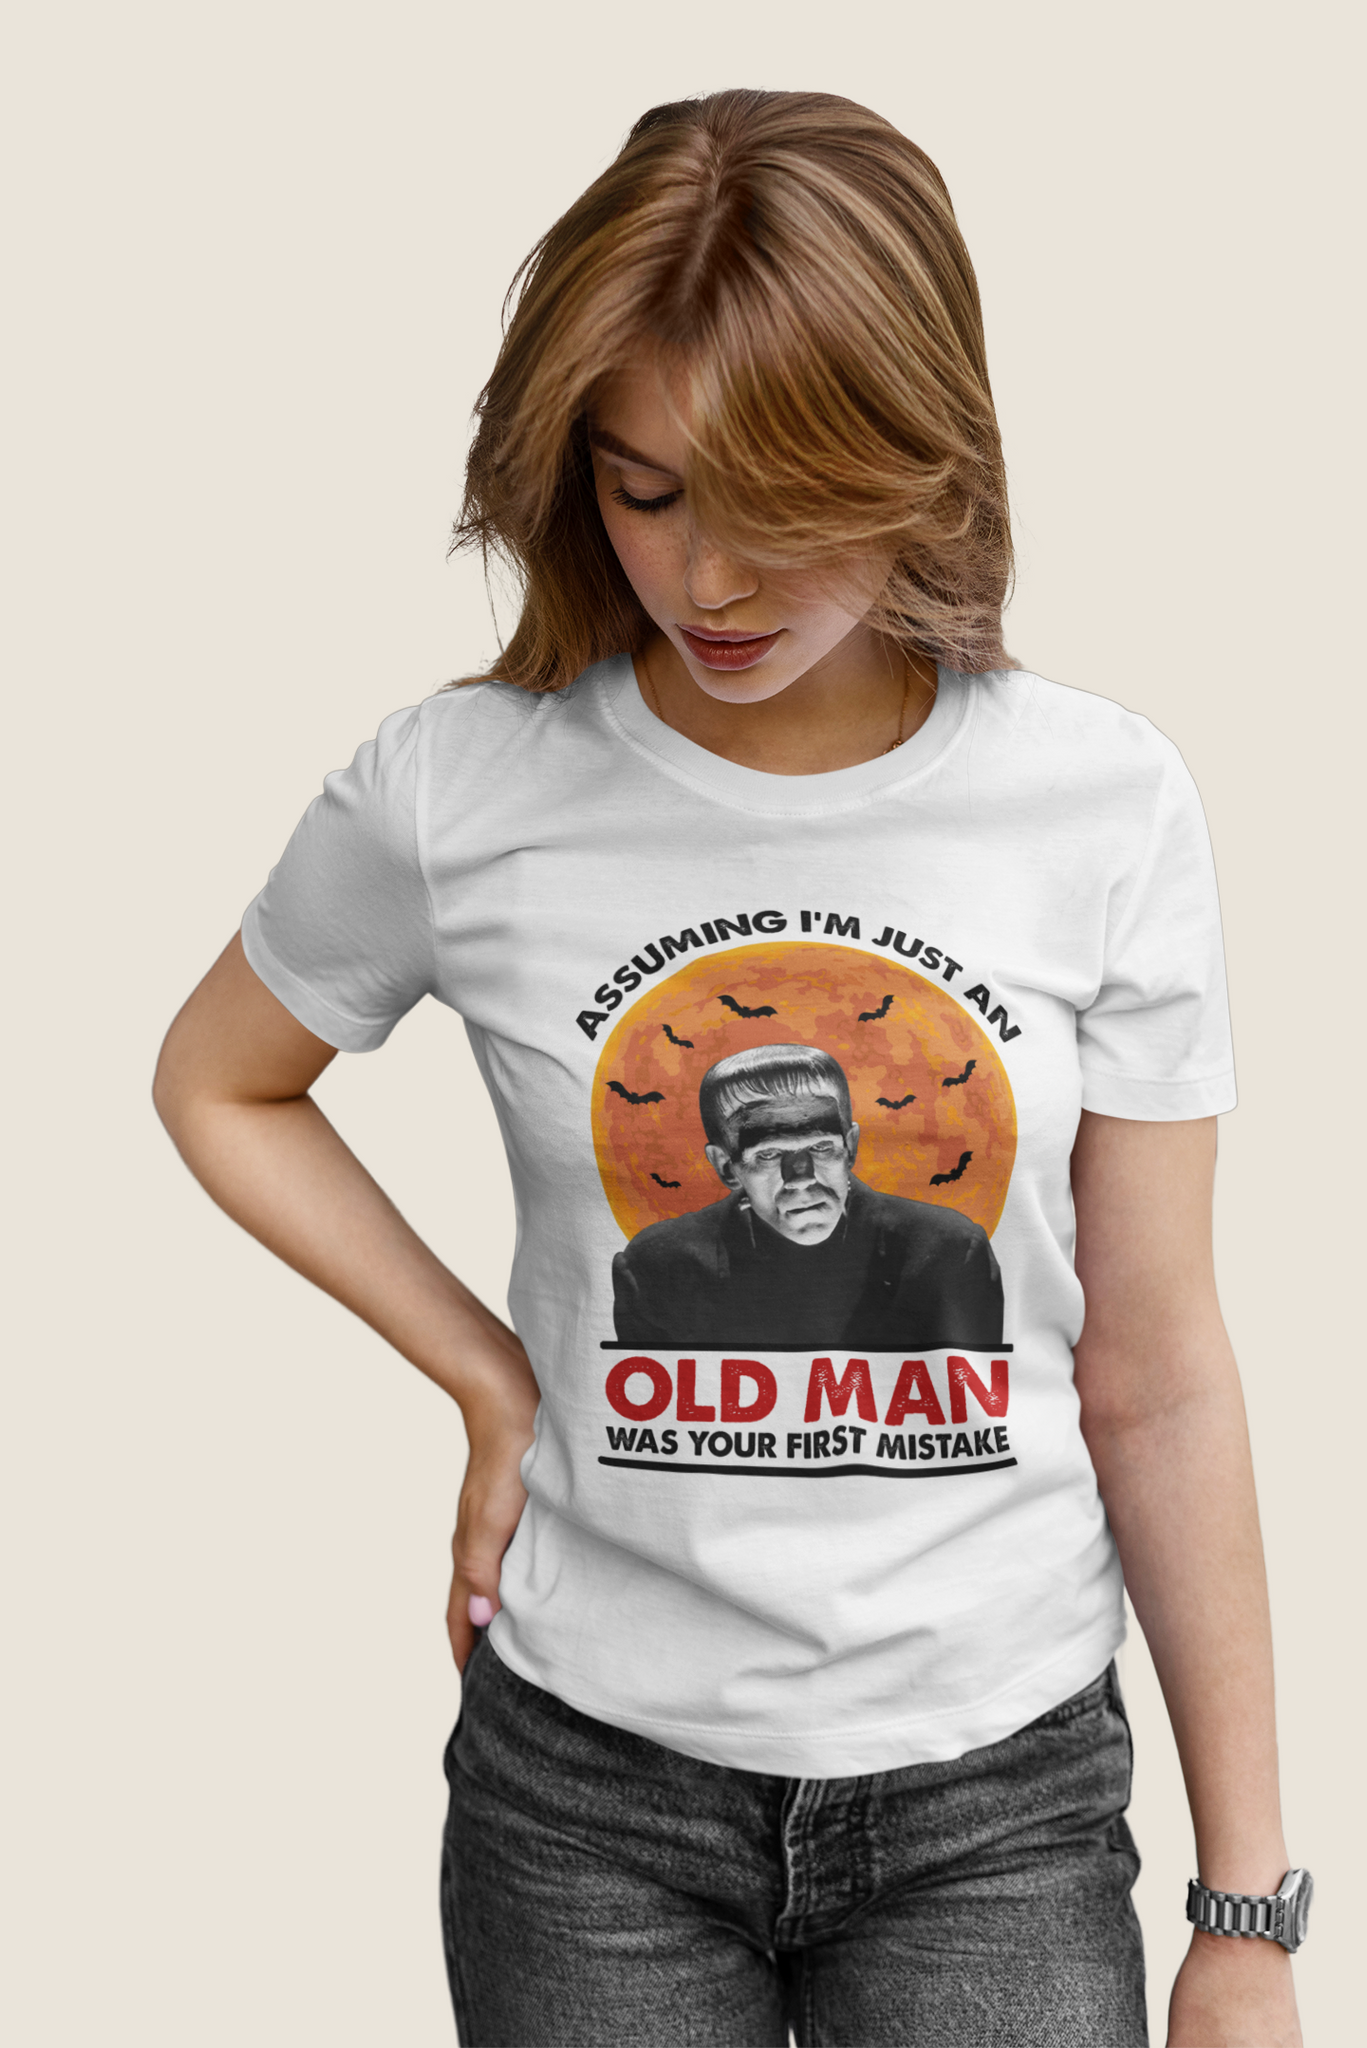 Frankenstein T Shirt, The Monster T Shirt, Assuming Im Just An Old Man Was Your First Mistake Tshirt, Halloween Gifts